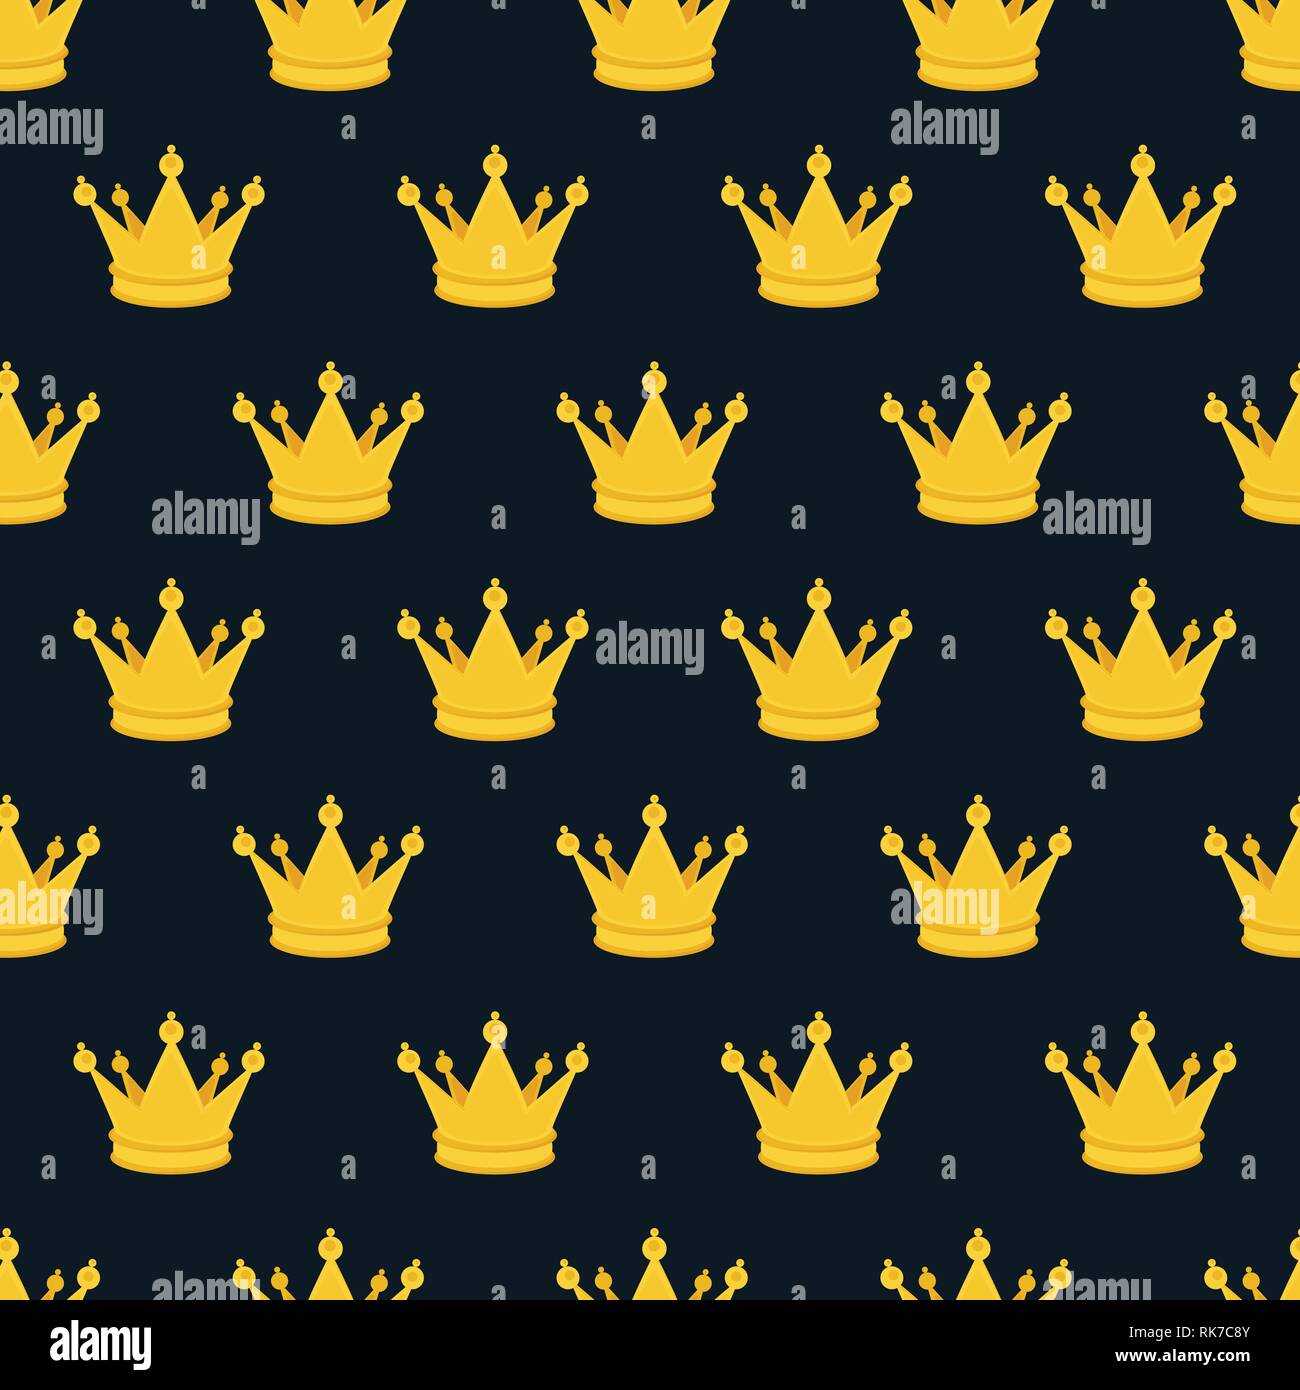 Royal Background Pattern Repeating Crowns Black Background